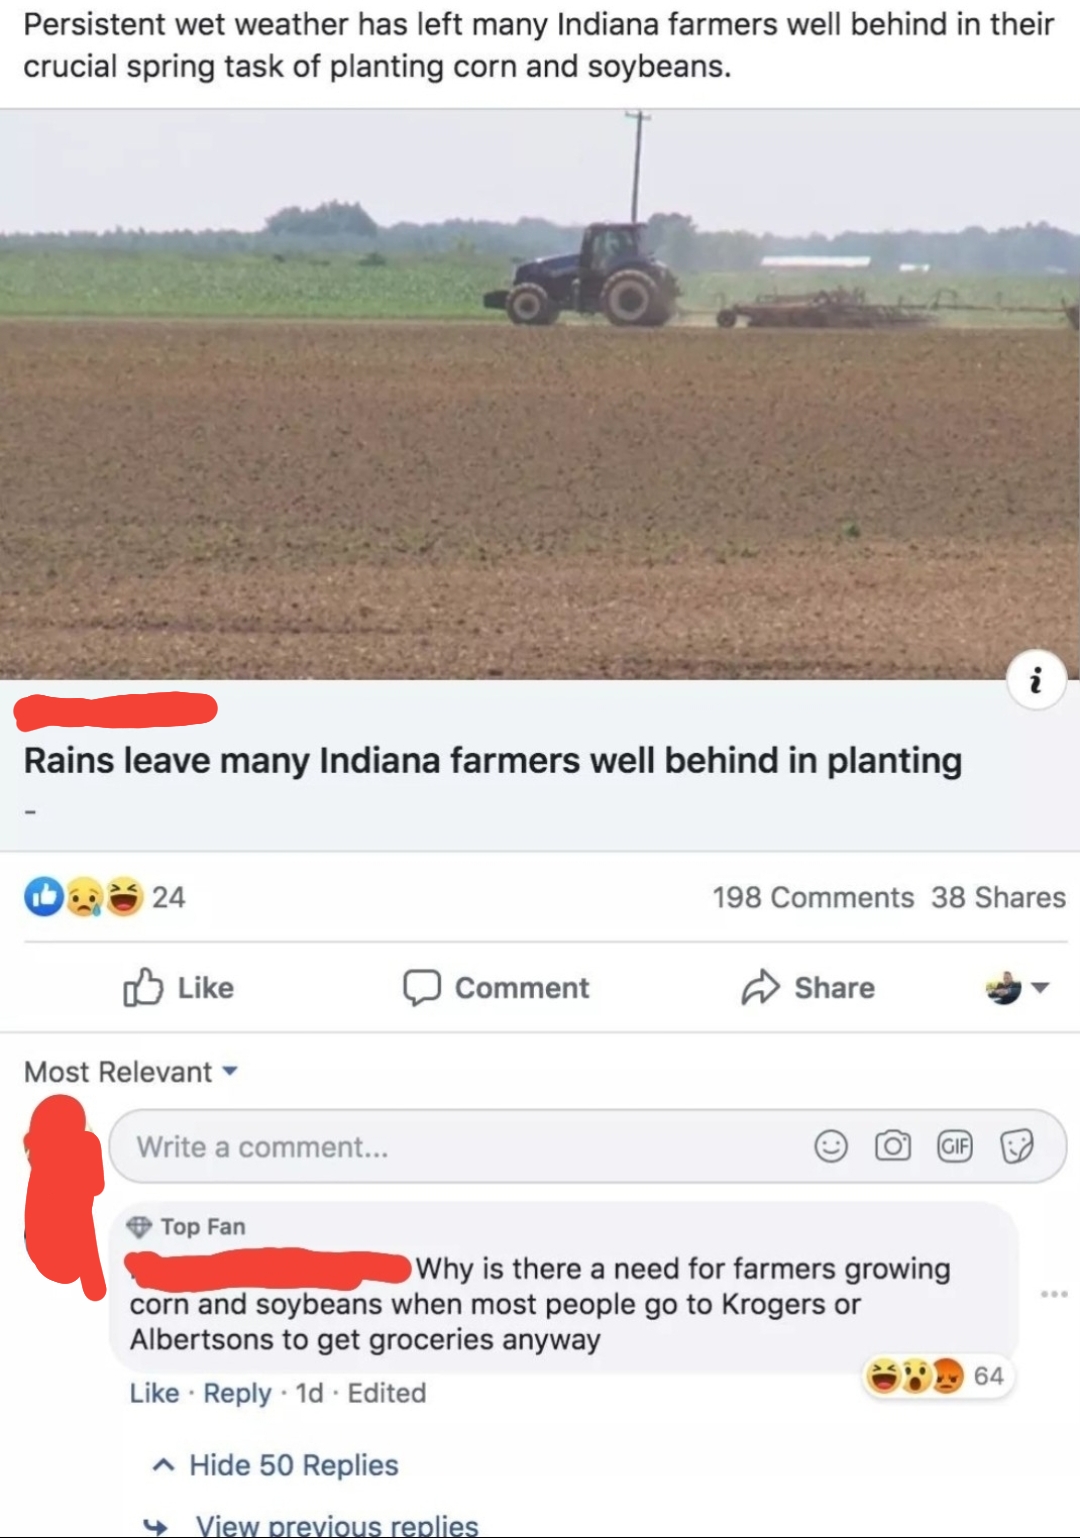 Farmers are so overrated.